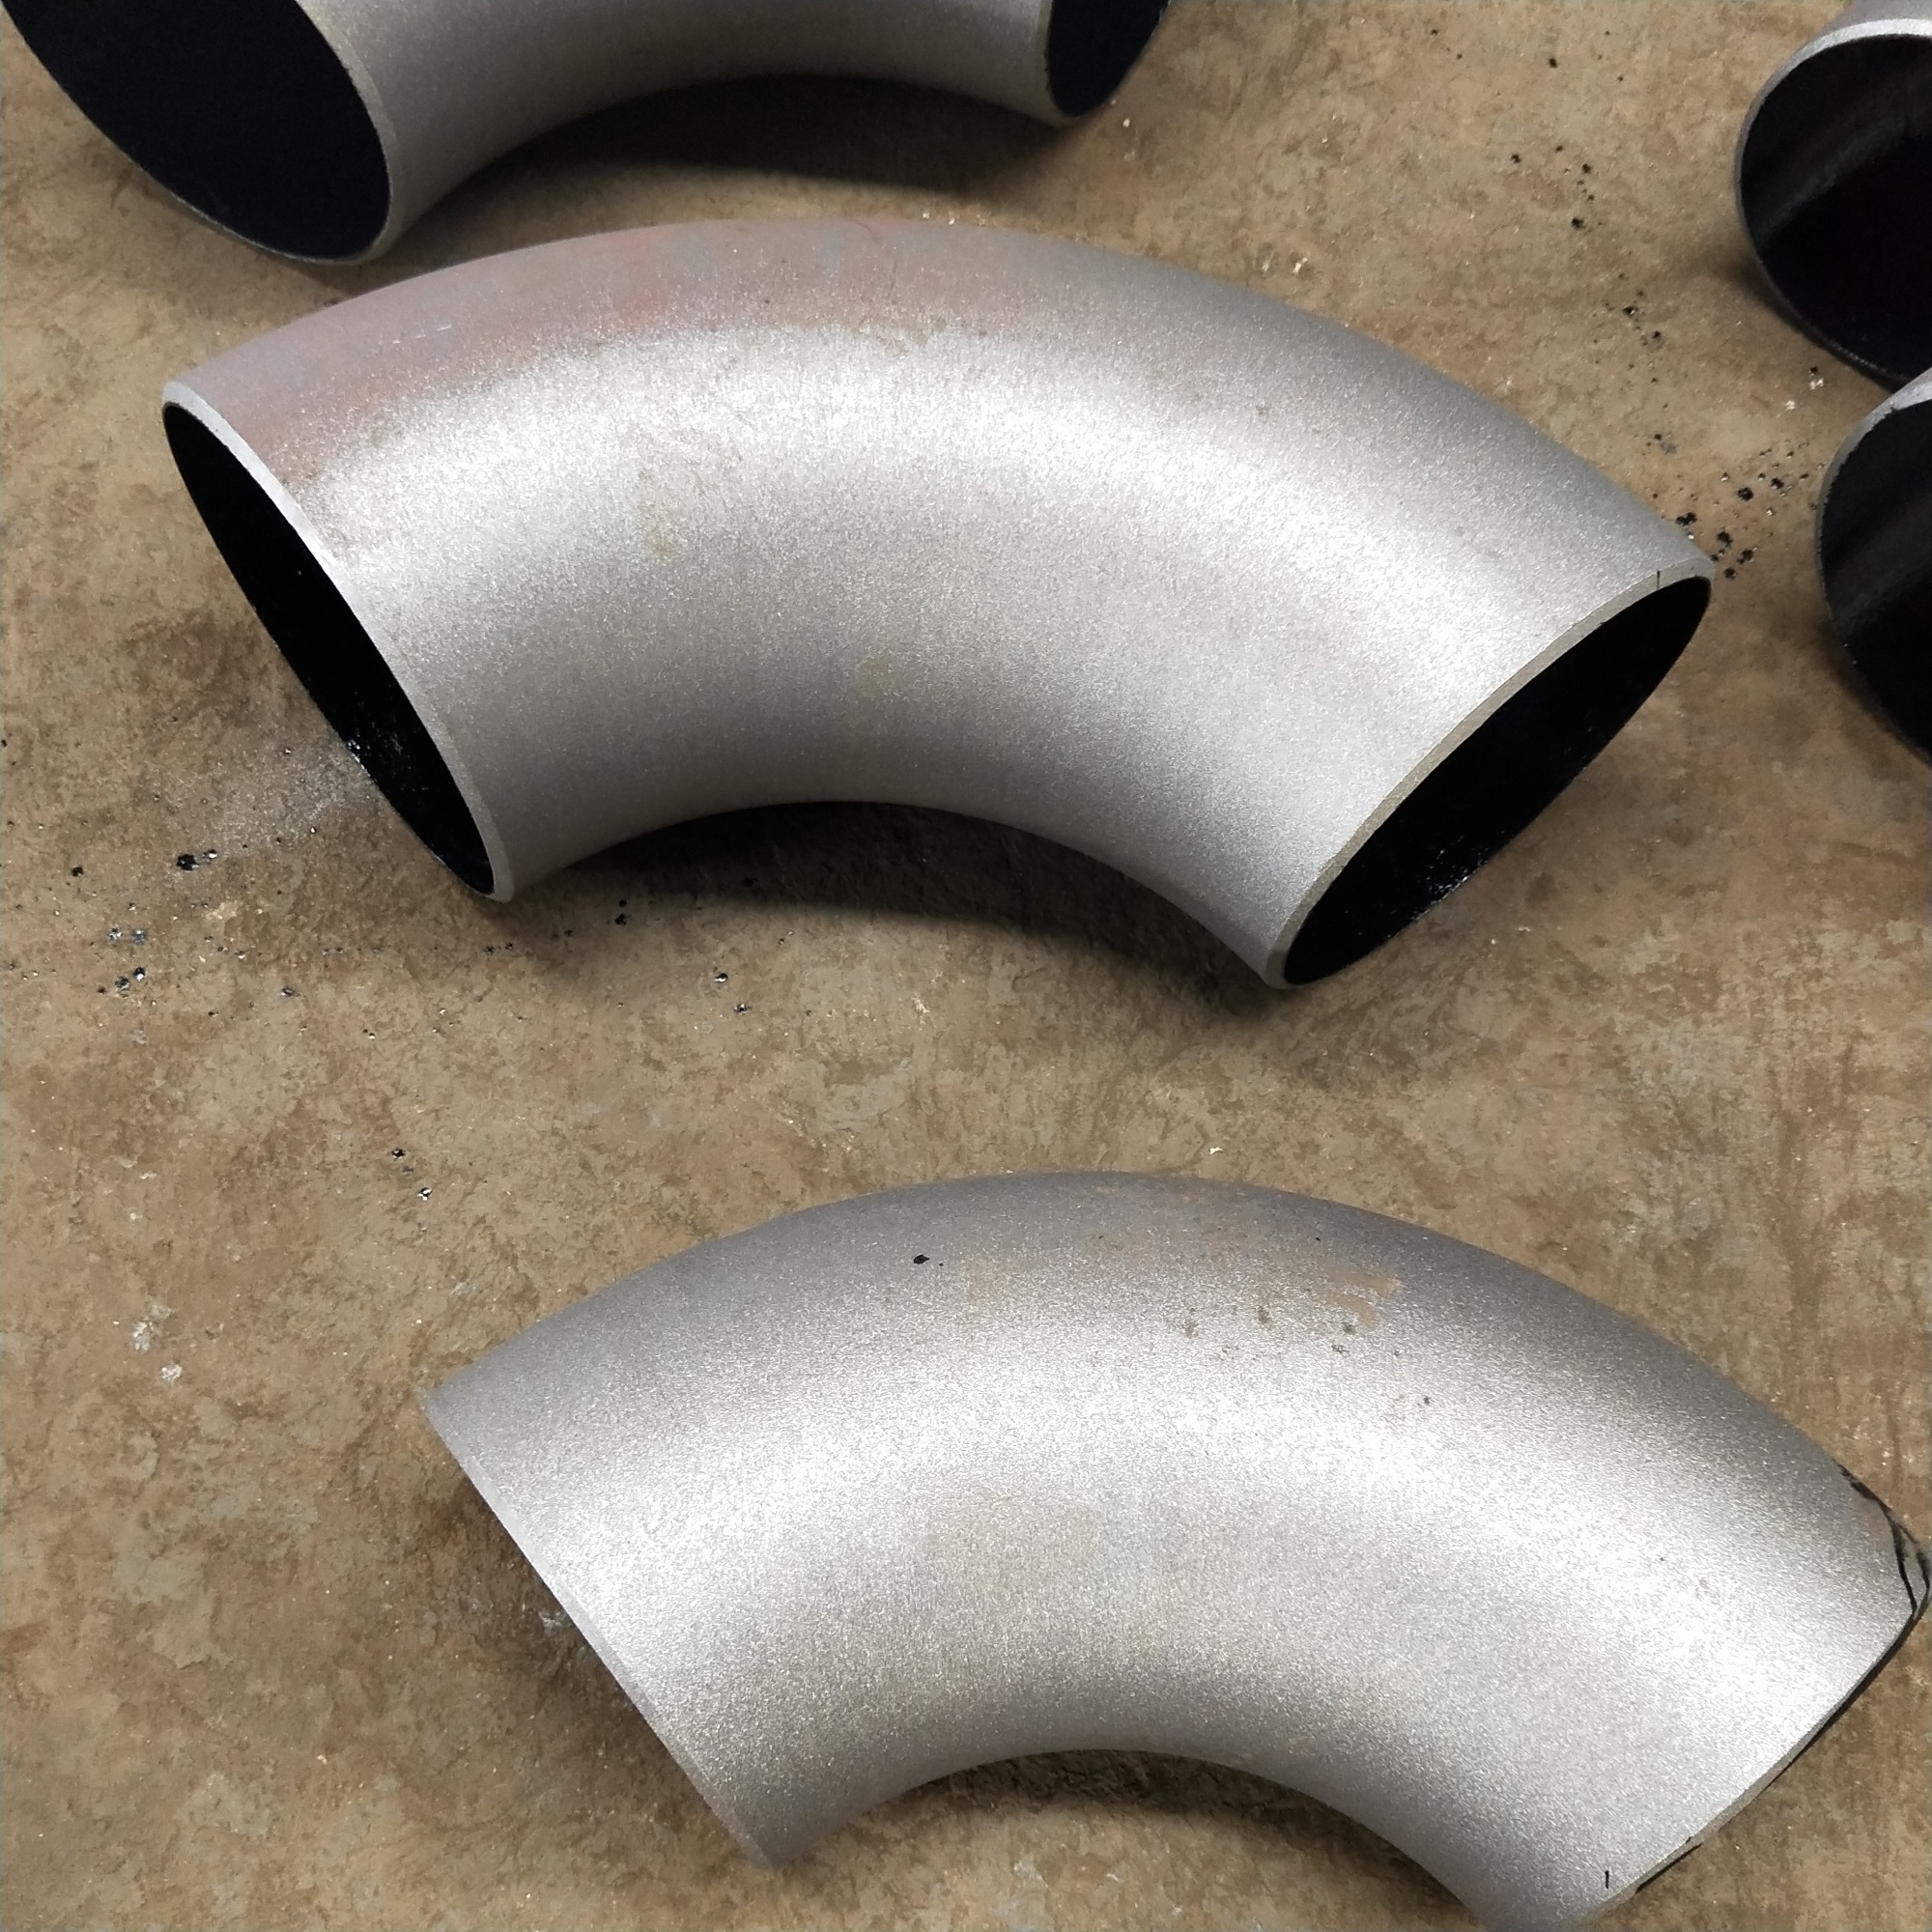 Why is elbow made of stainless steel?